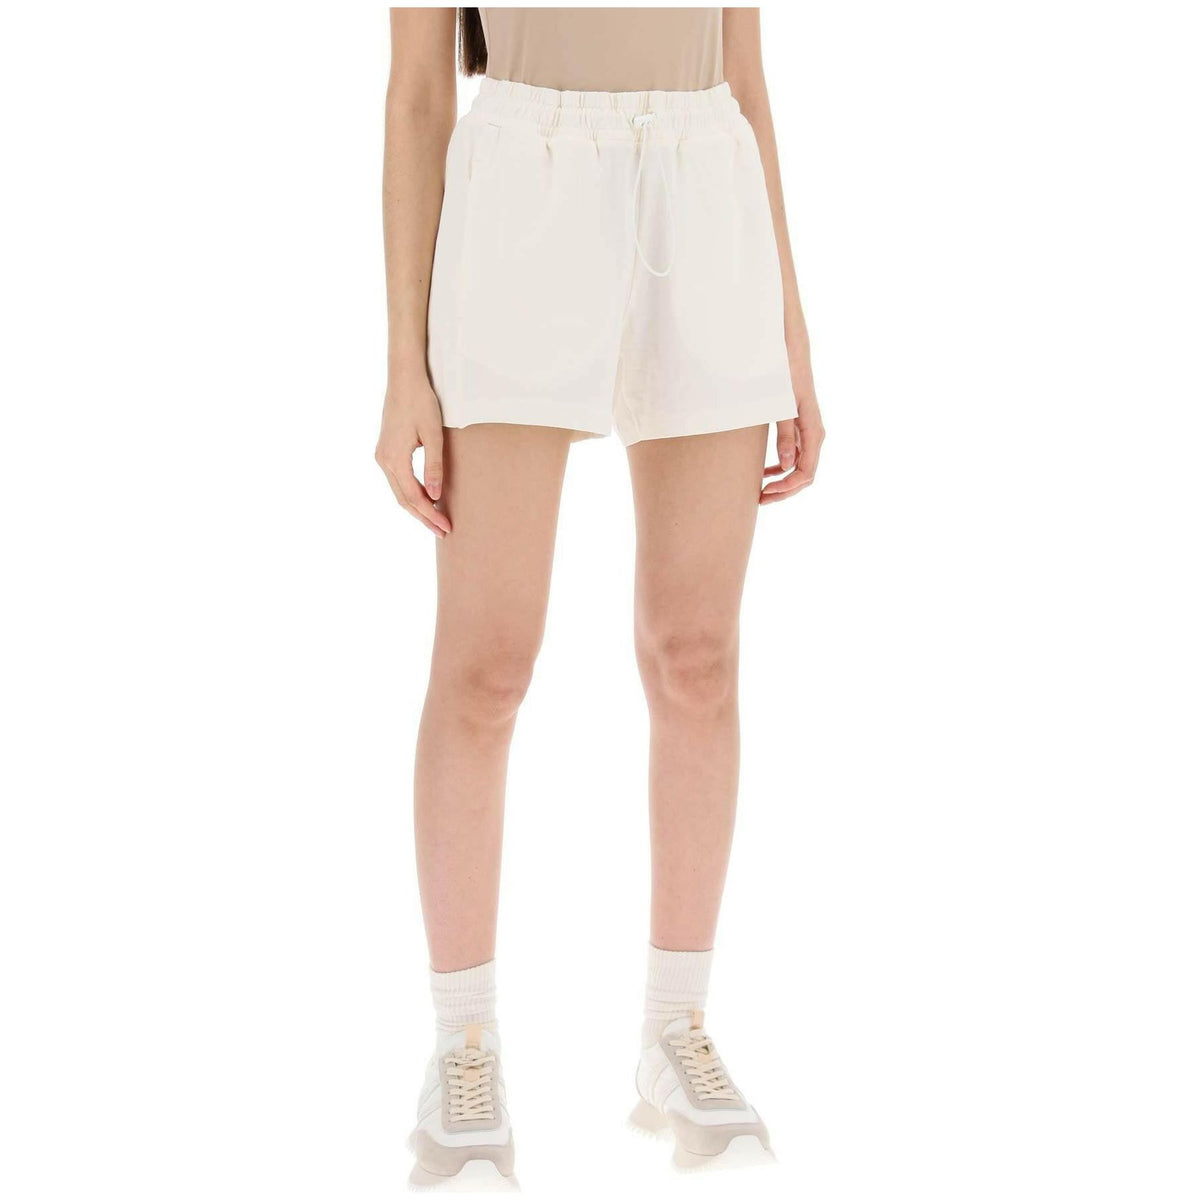 MONCLER - White Relaxed Fit Jersey Shorts with Poplin Inserts - JOHN JULIA